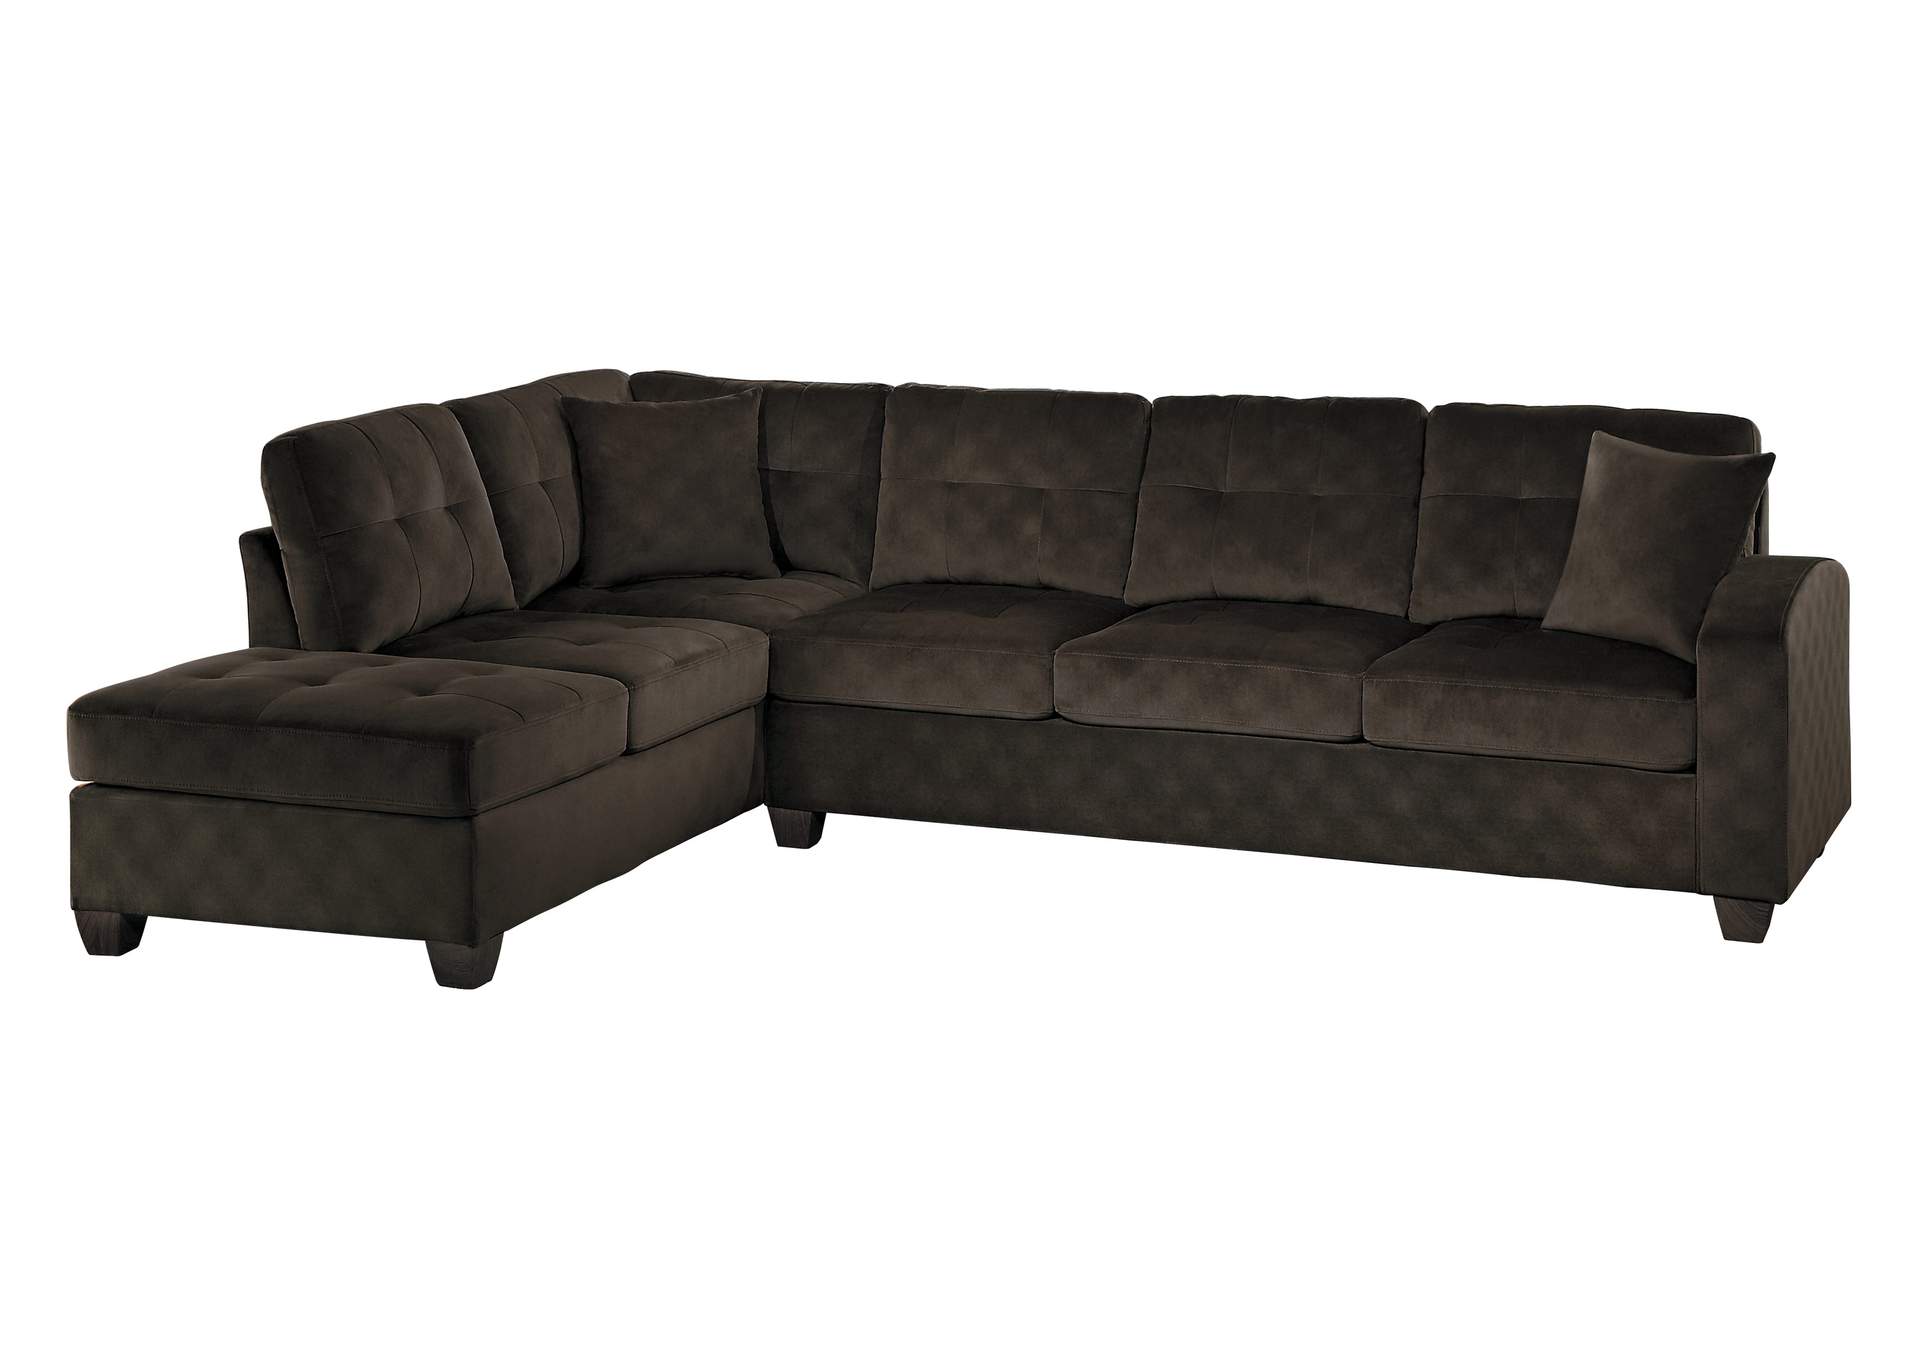 Chocolate 2-Piece Reversible Sectional,Homelegance